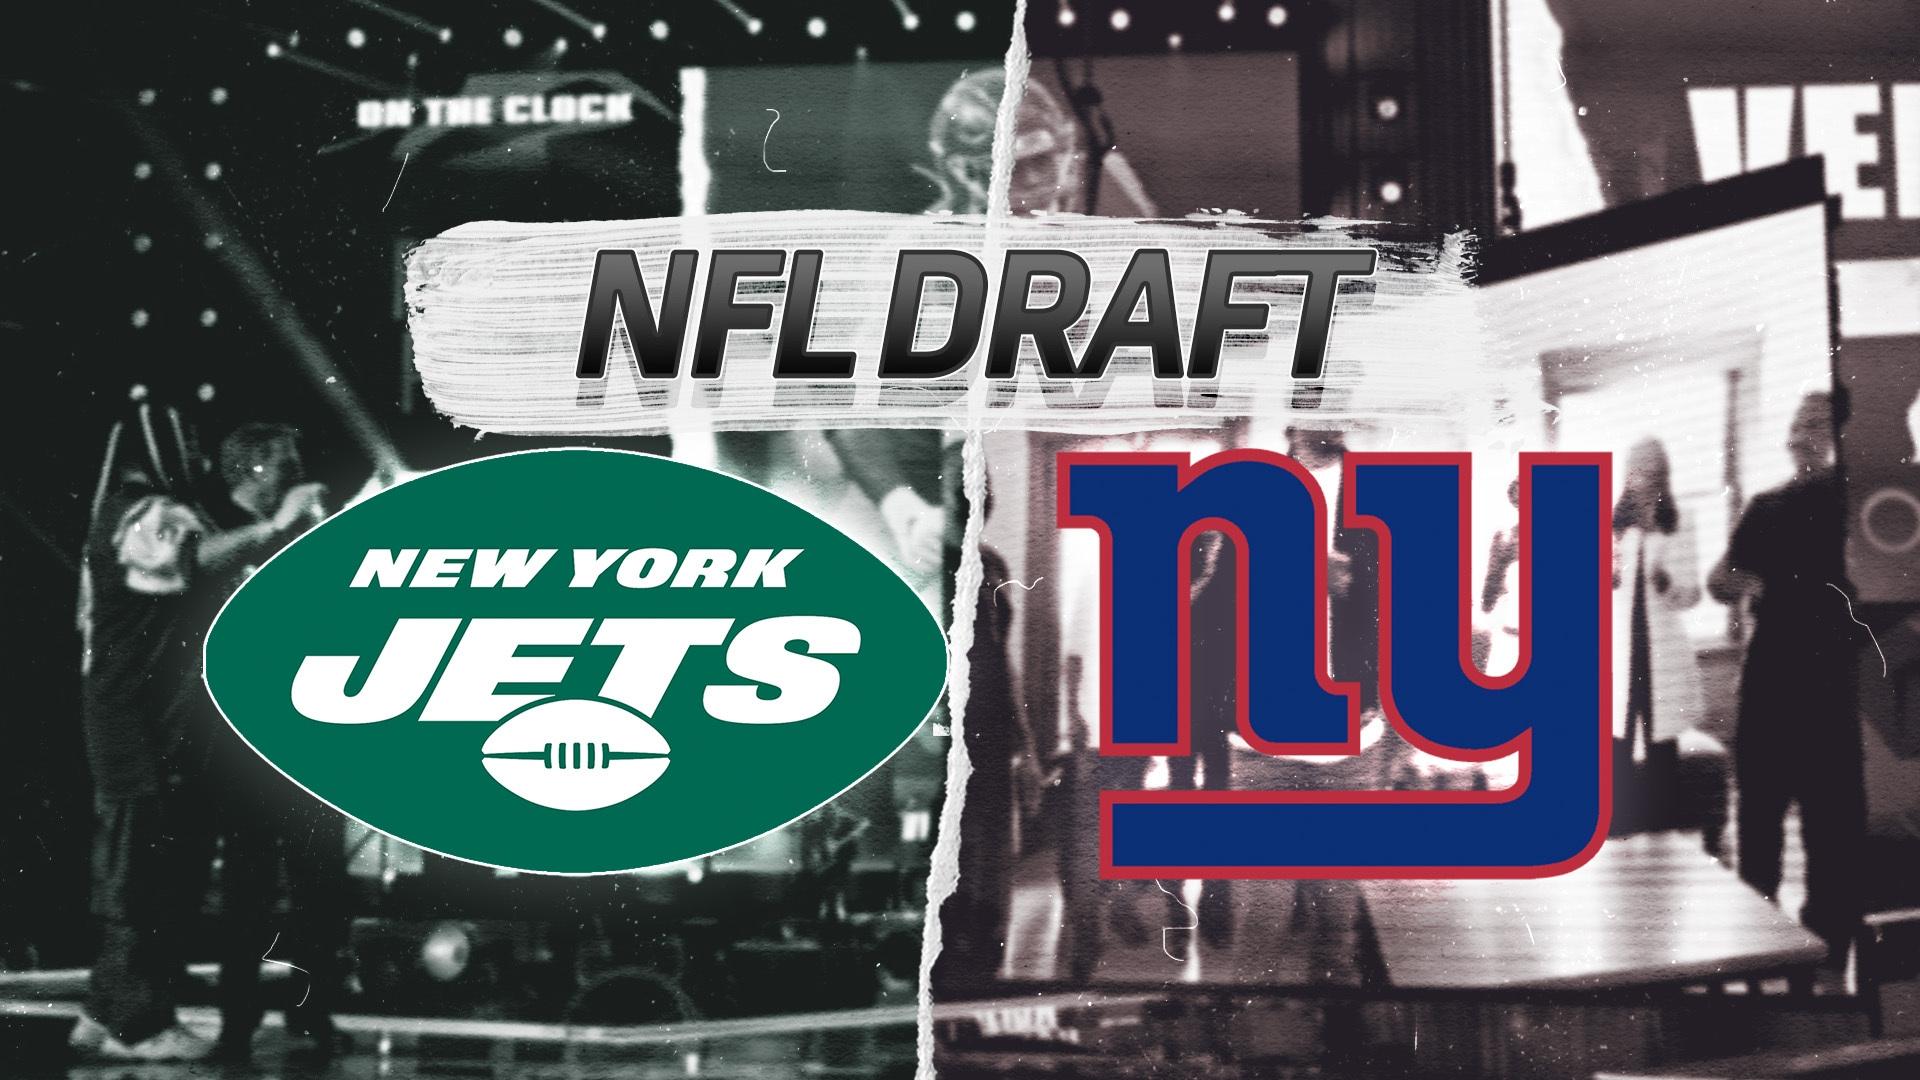 NFL Draft Events Page Header Banner - Jets and Giants